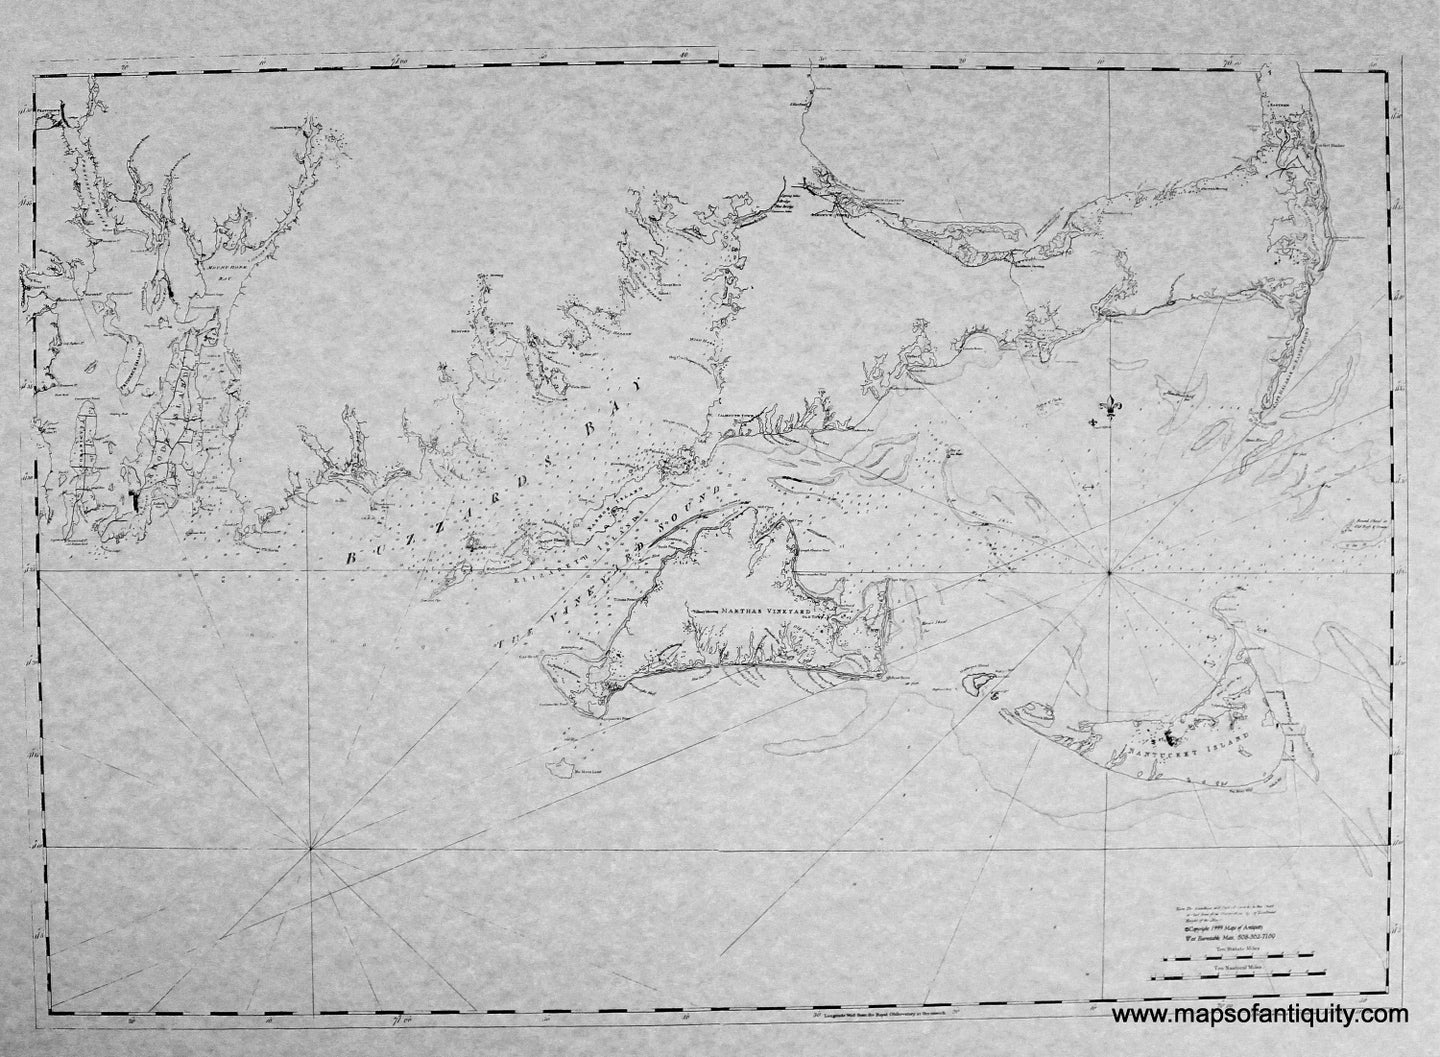 Black-and-White-Reproduction-Southeastern-Massachusetts-in-1781.---Reproduction-Reproductions-Coastal-Cape-Cod-Reproduction-Des-Barres-Maps-Of-Antiquity